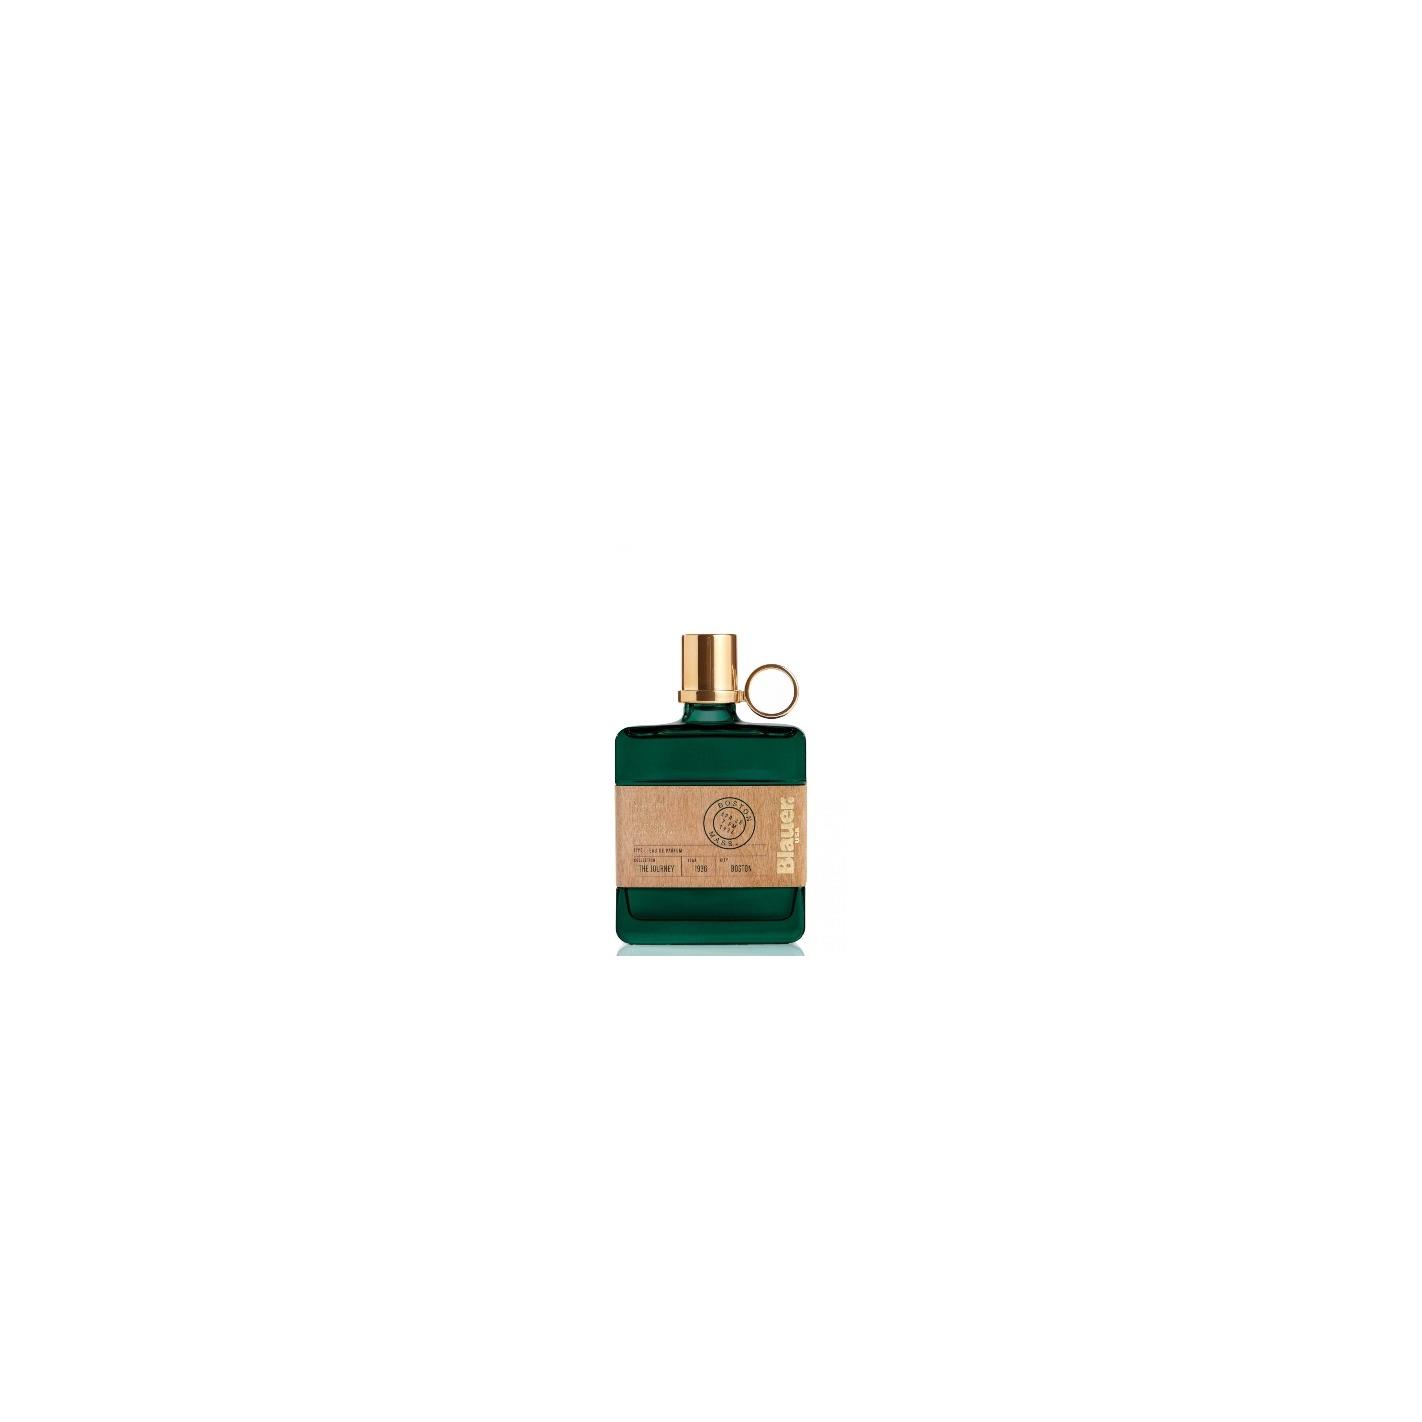 Blauer - USA The Journey Collection EDP